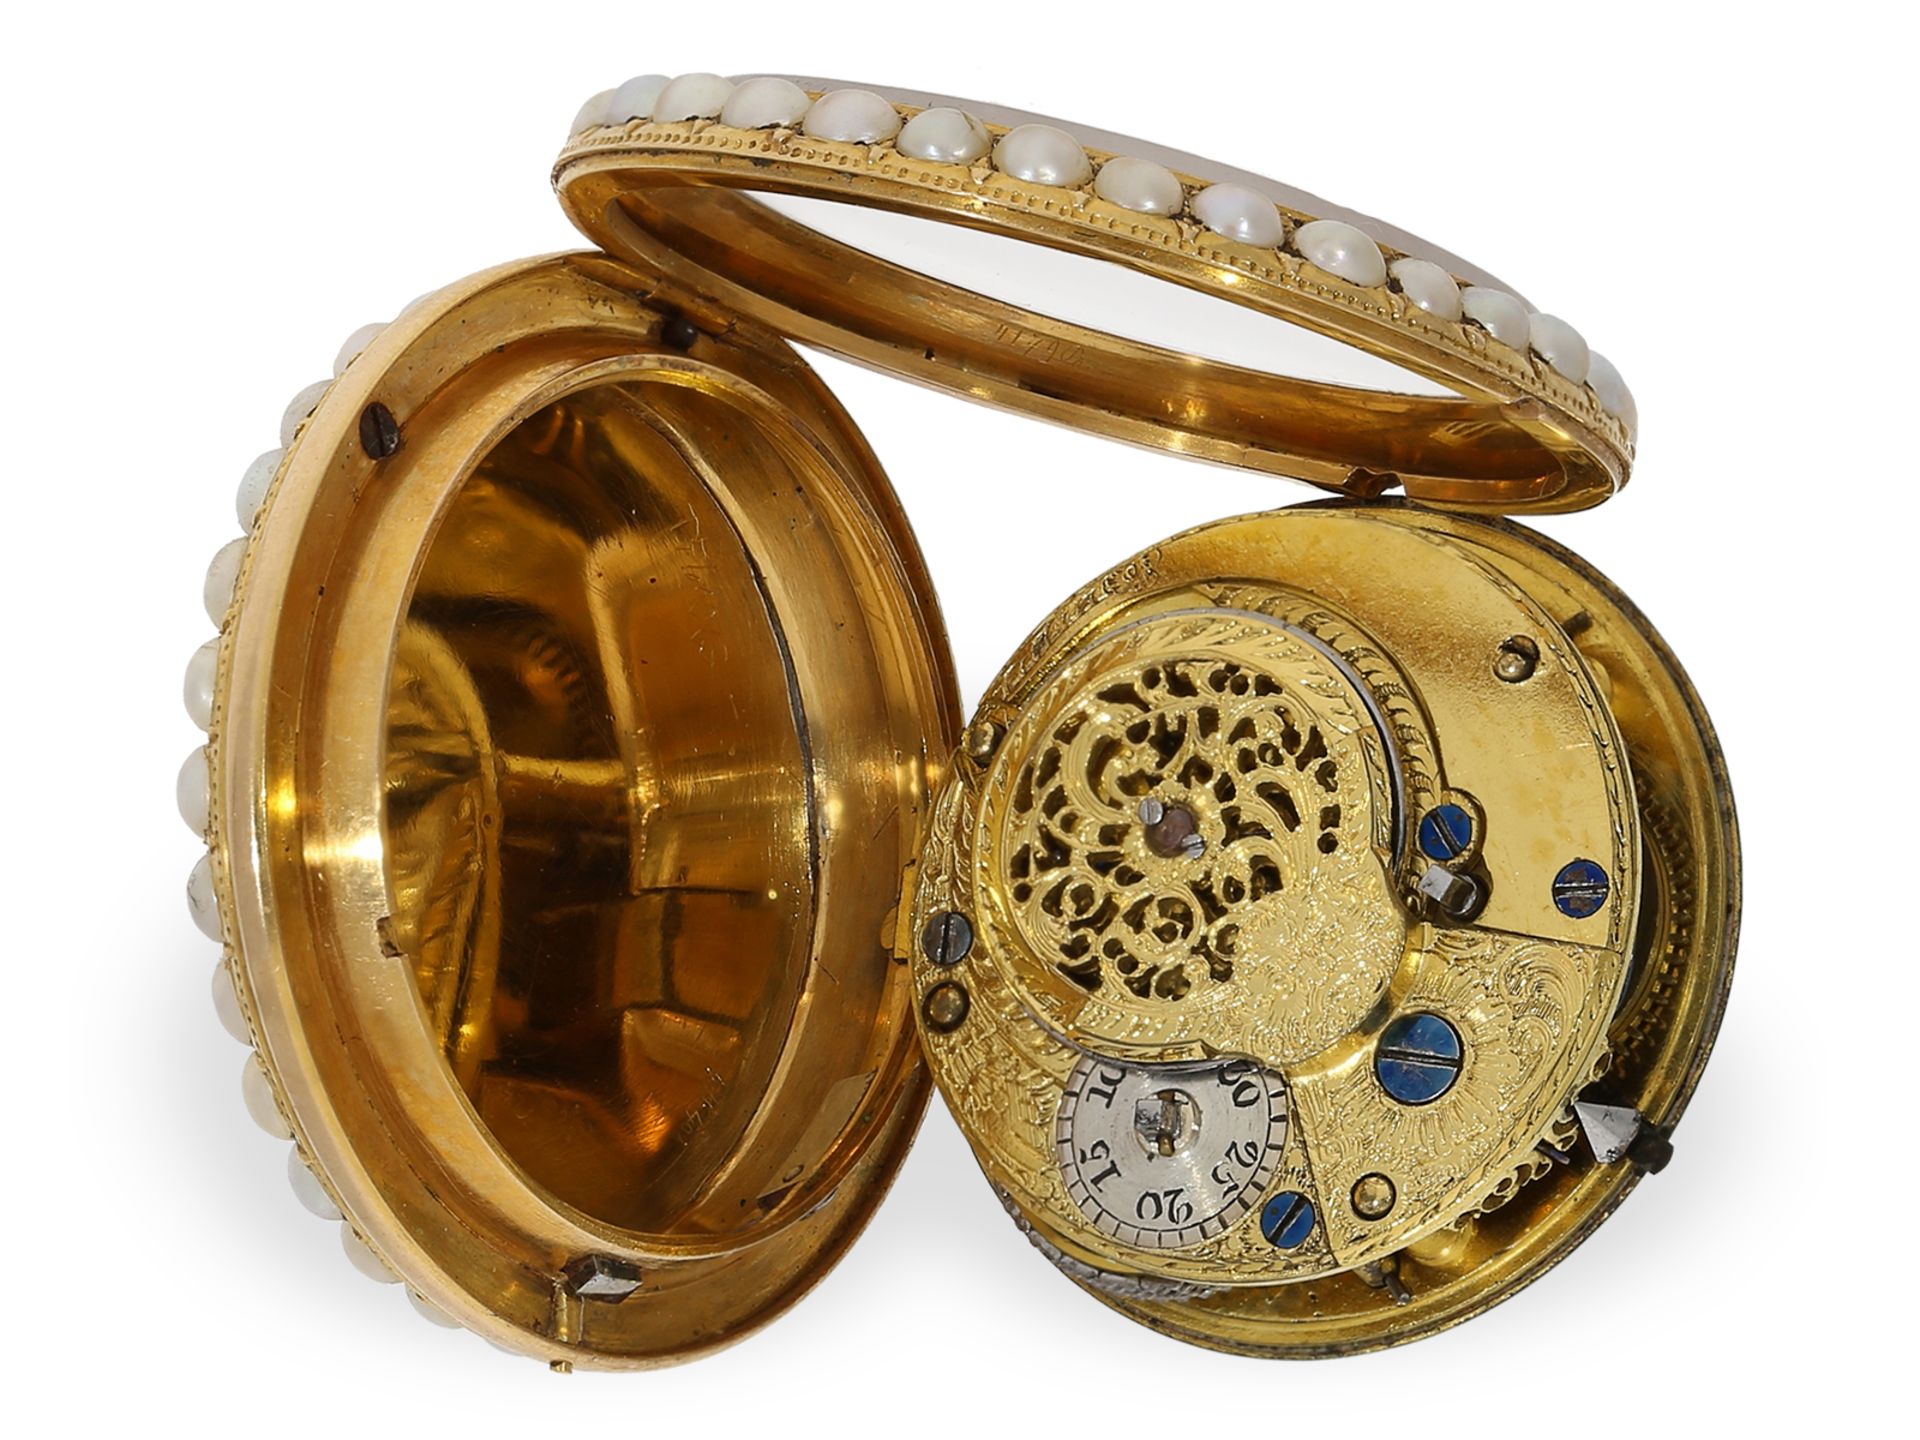 Pocket watch: very fine English gold/enamel verge watch with Oriental pearl setting, ca. 1790 - Image 5 of 5